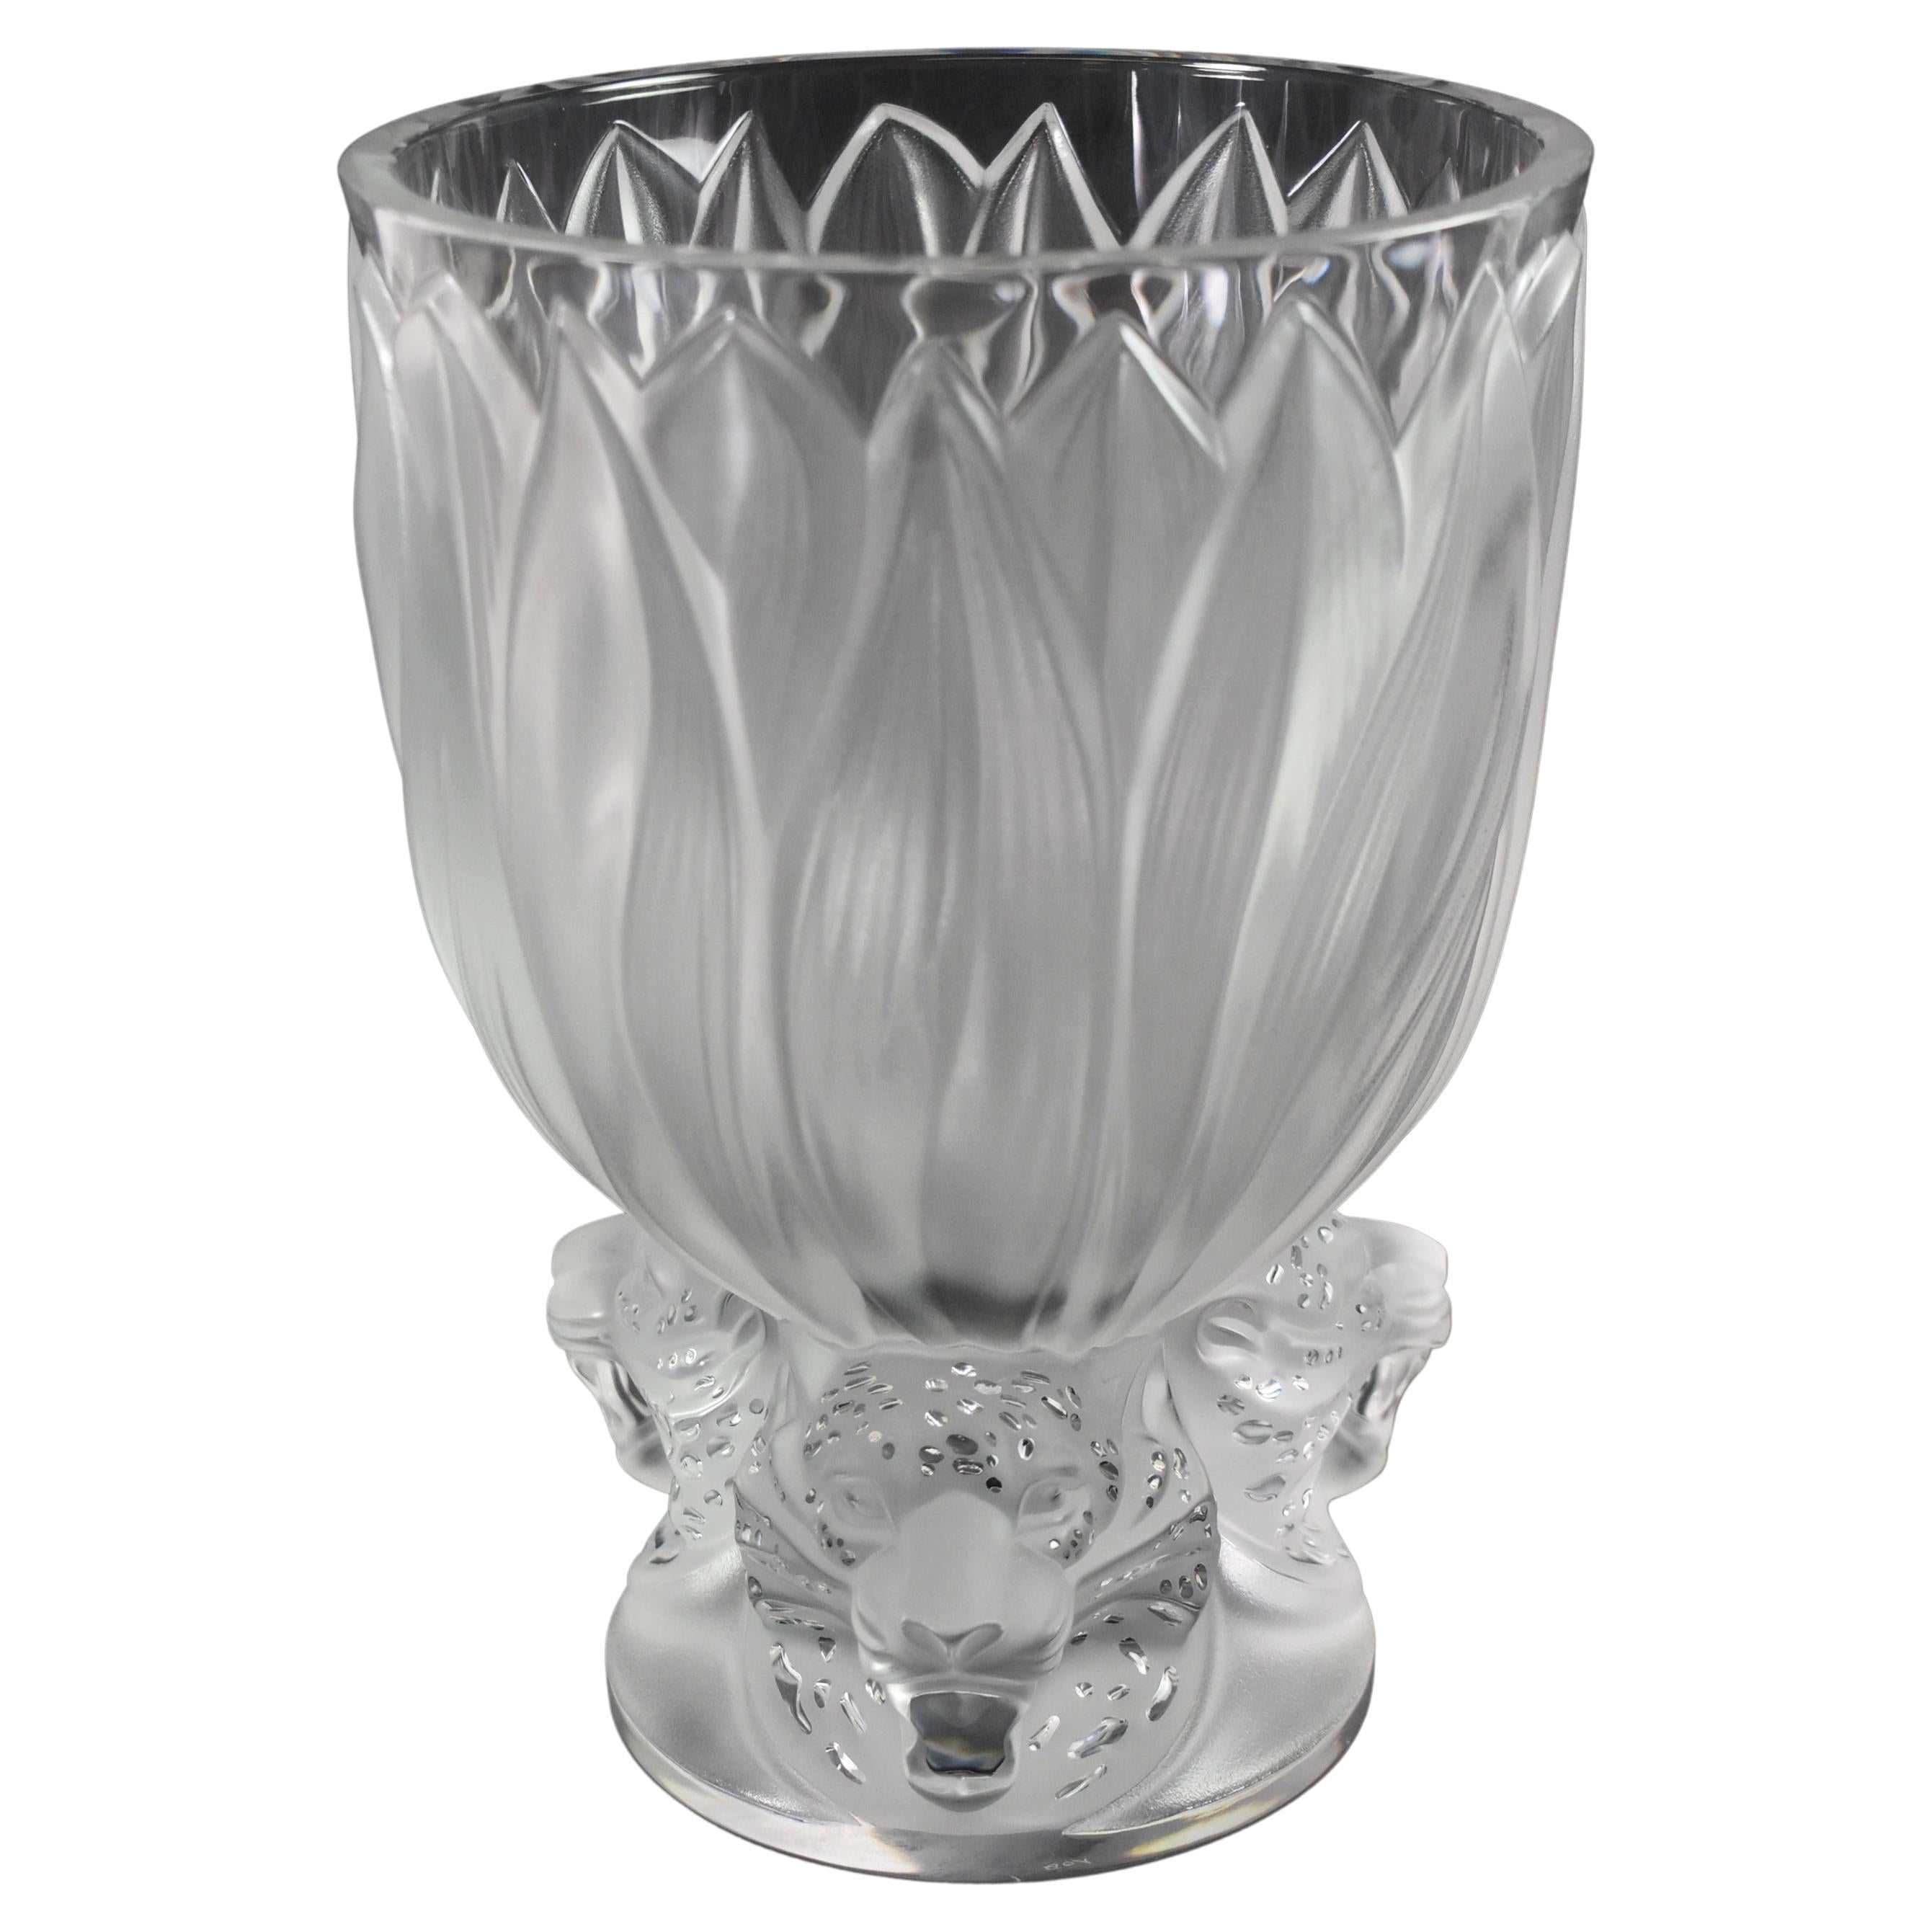 Lalique "Three Headed Jaguars" 11.25" tall Vase For Sale